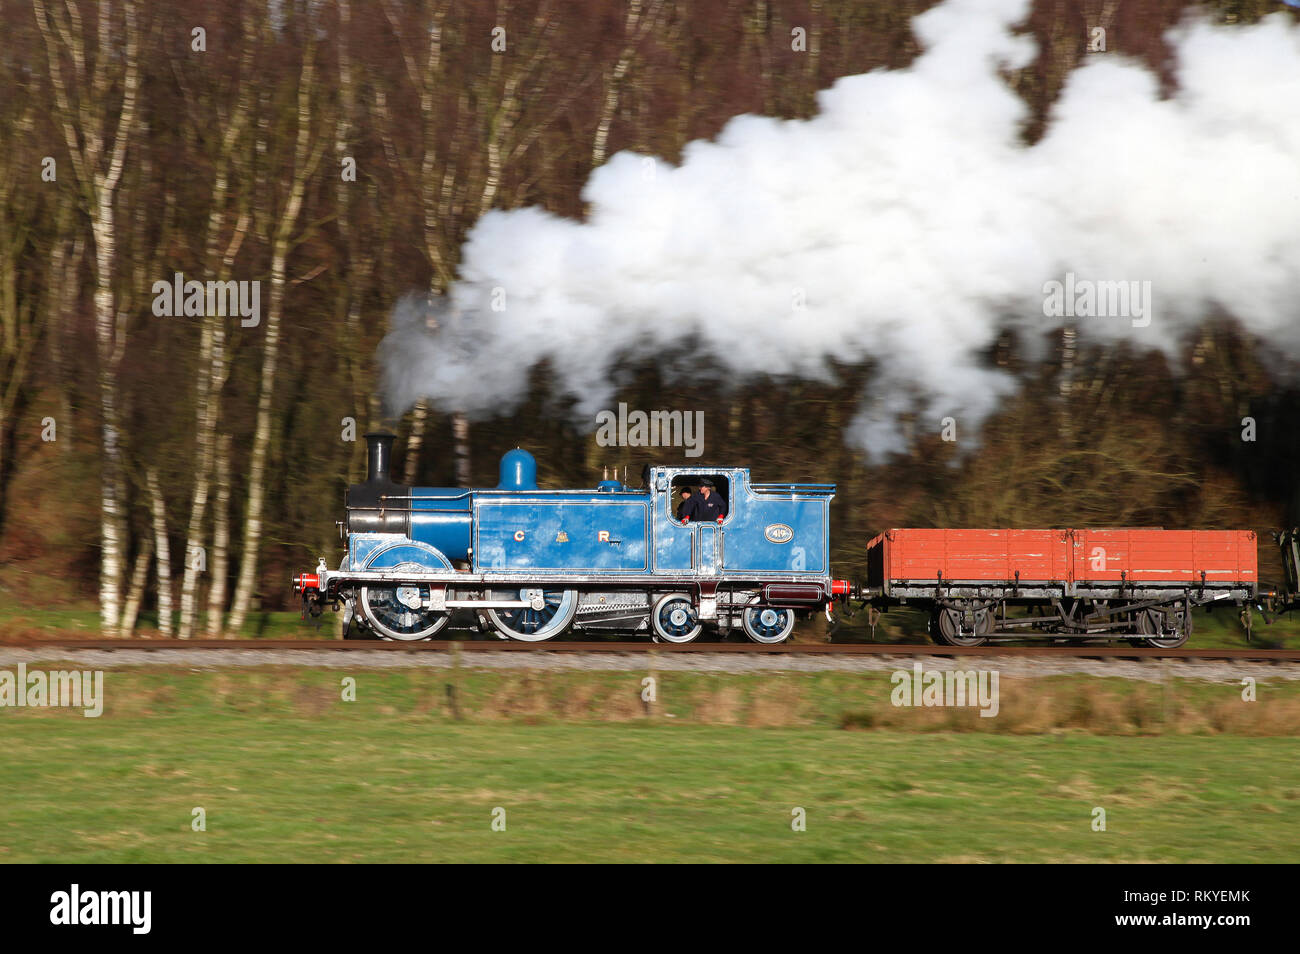 Caley tank 419 heads past Consall wood on 10.2.19 on the Churnet Valley railway. Stock Photo